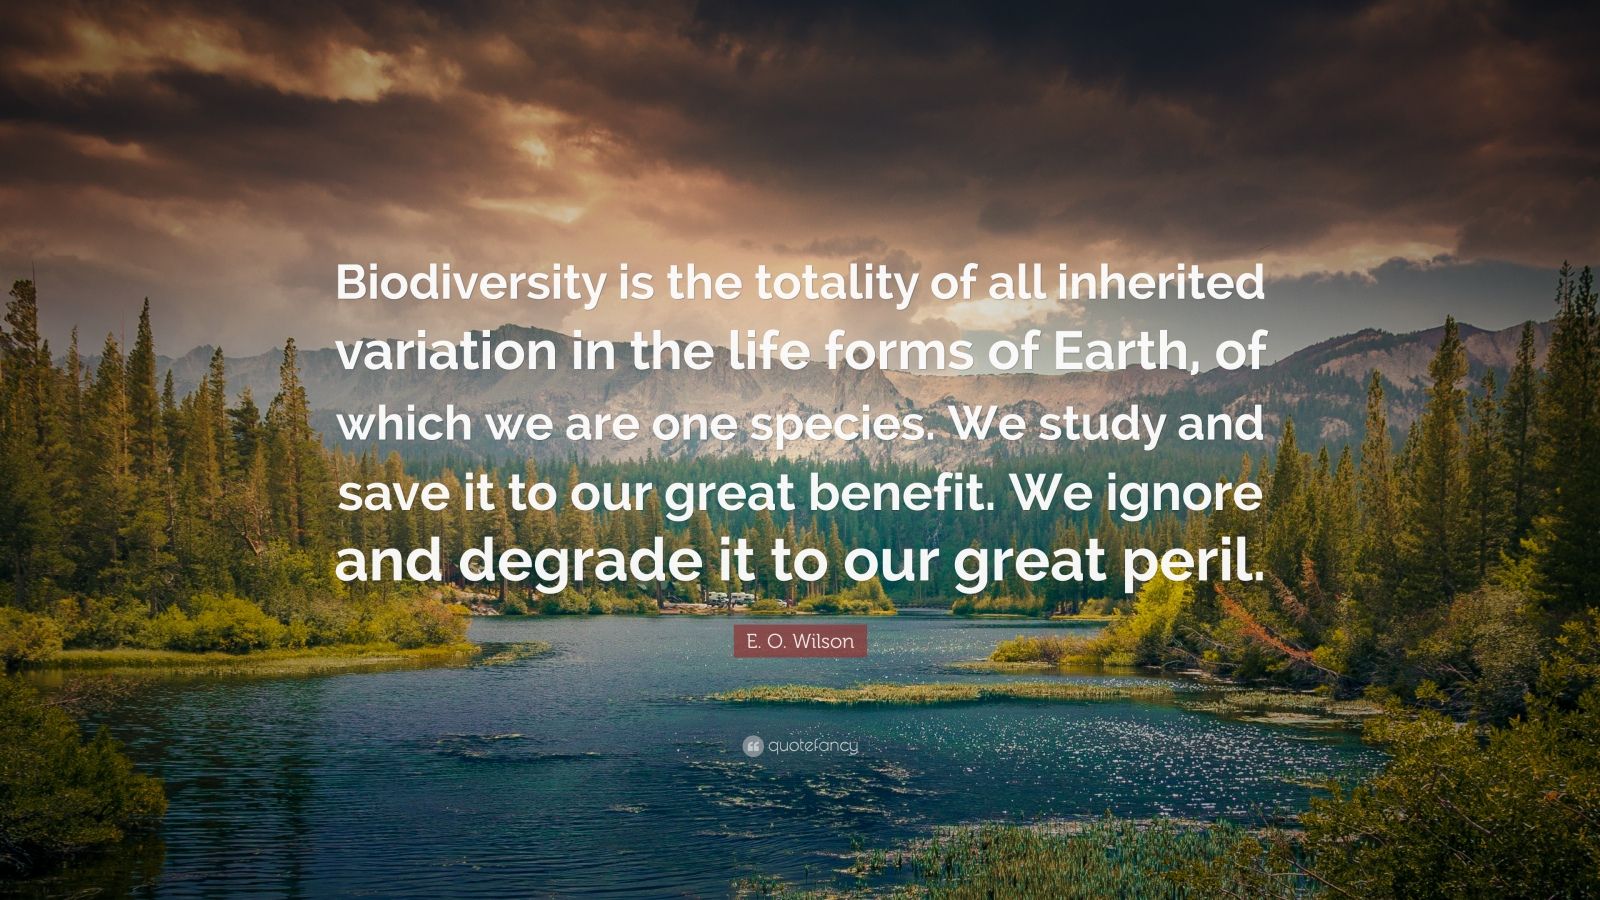 E. O. Wilson Quote: “Biodiversity is the totality of all inherited